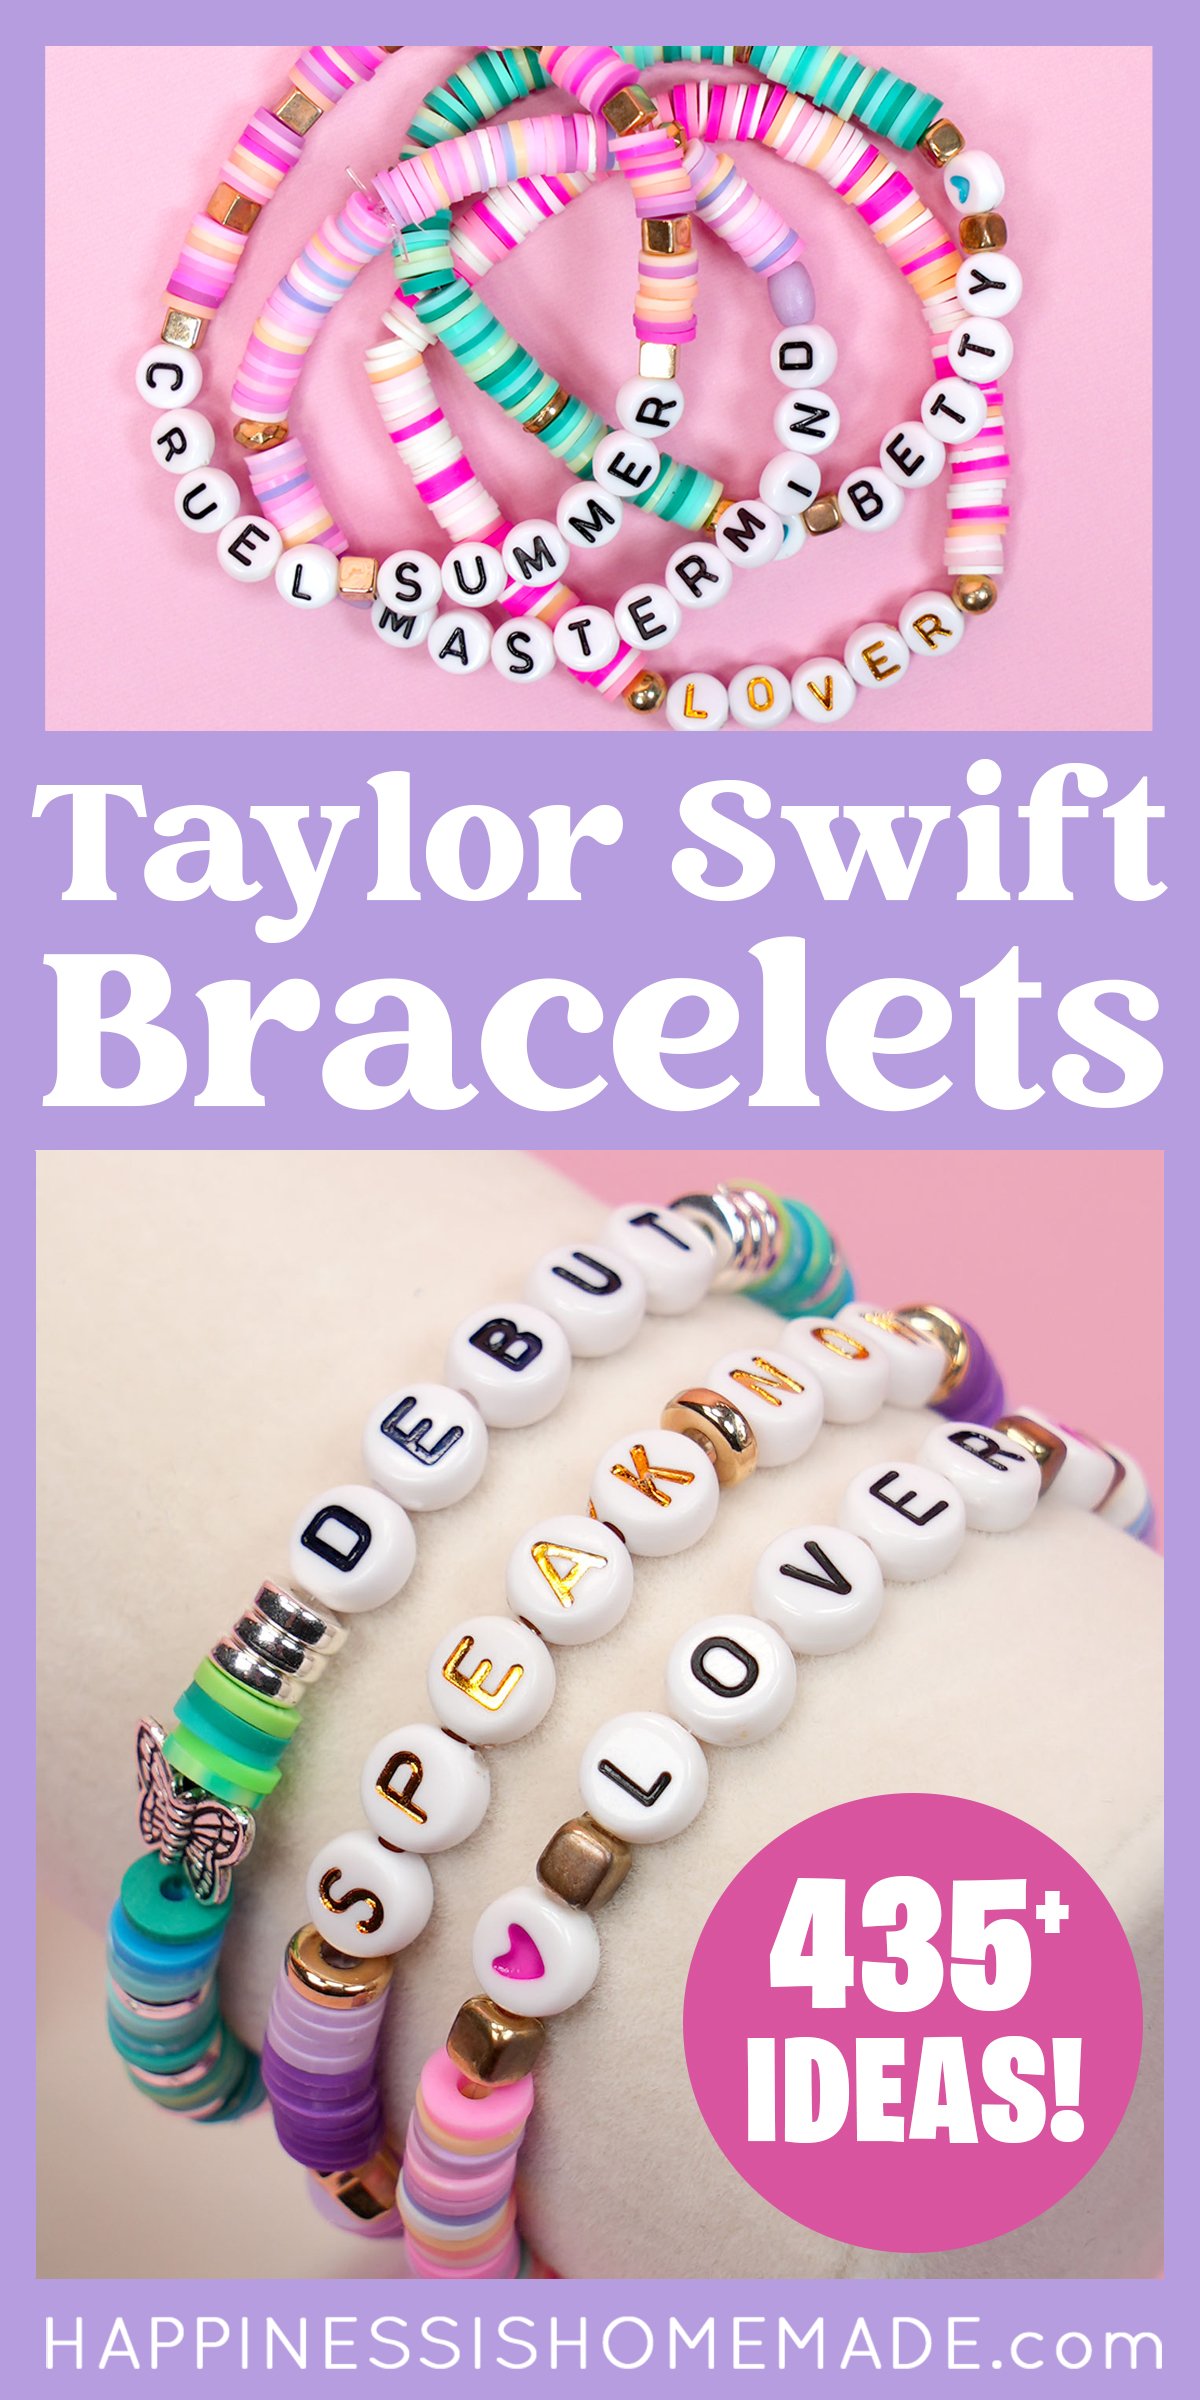 Pinterest graphic: "Taylor Swift Friendship Bracelets: 435+ Ideas" with collage of bracelet examples